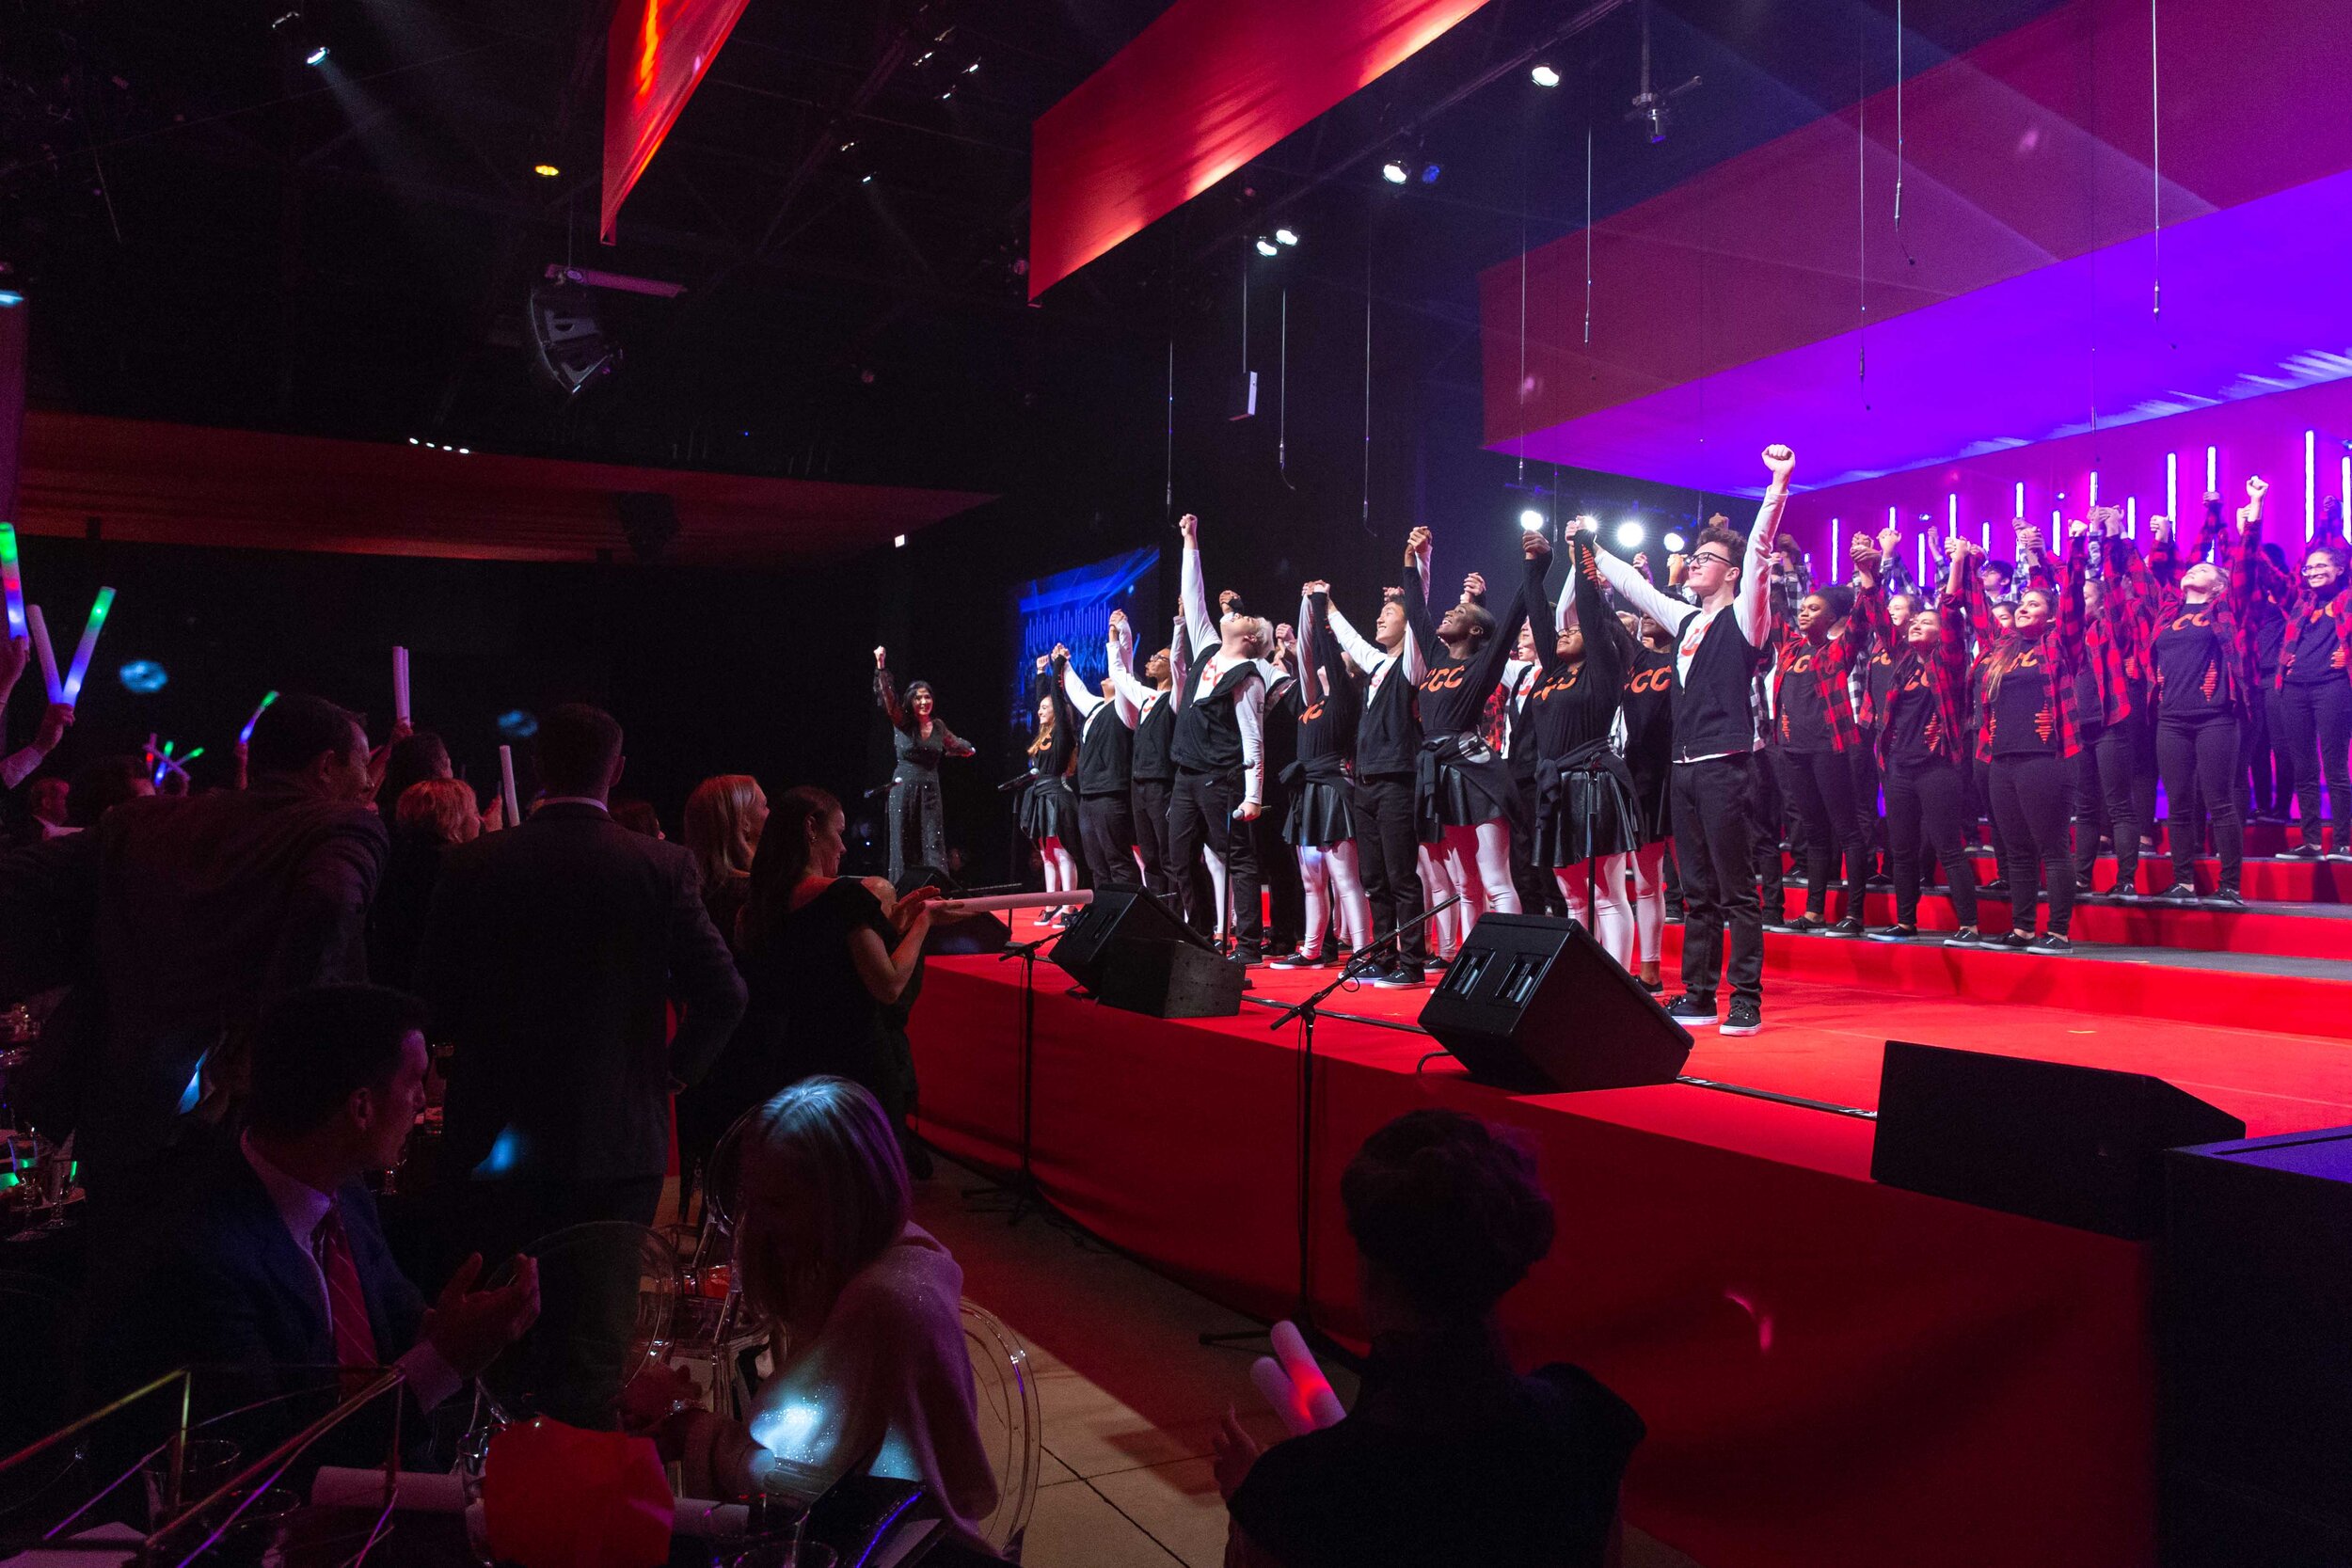  October: The Chicago Children’s Choir concludes another record-breaking Red Jacket Optional gala. 